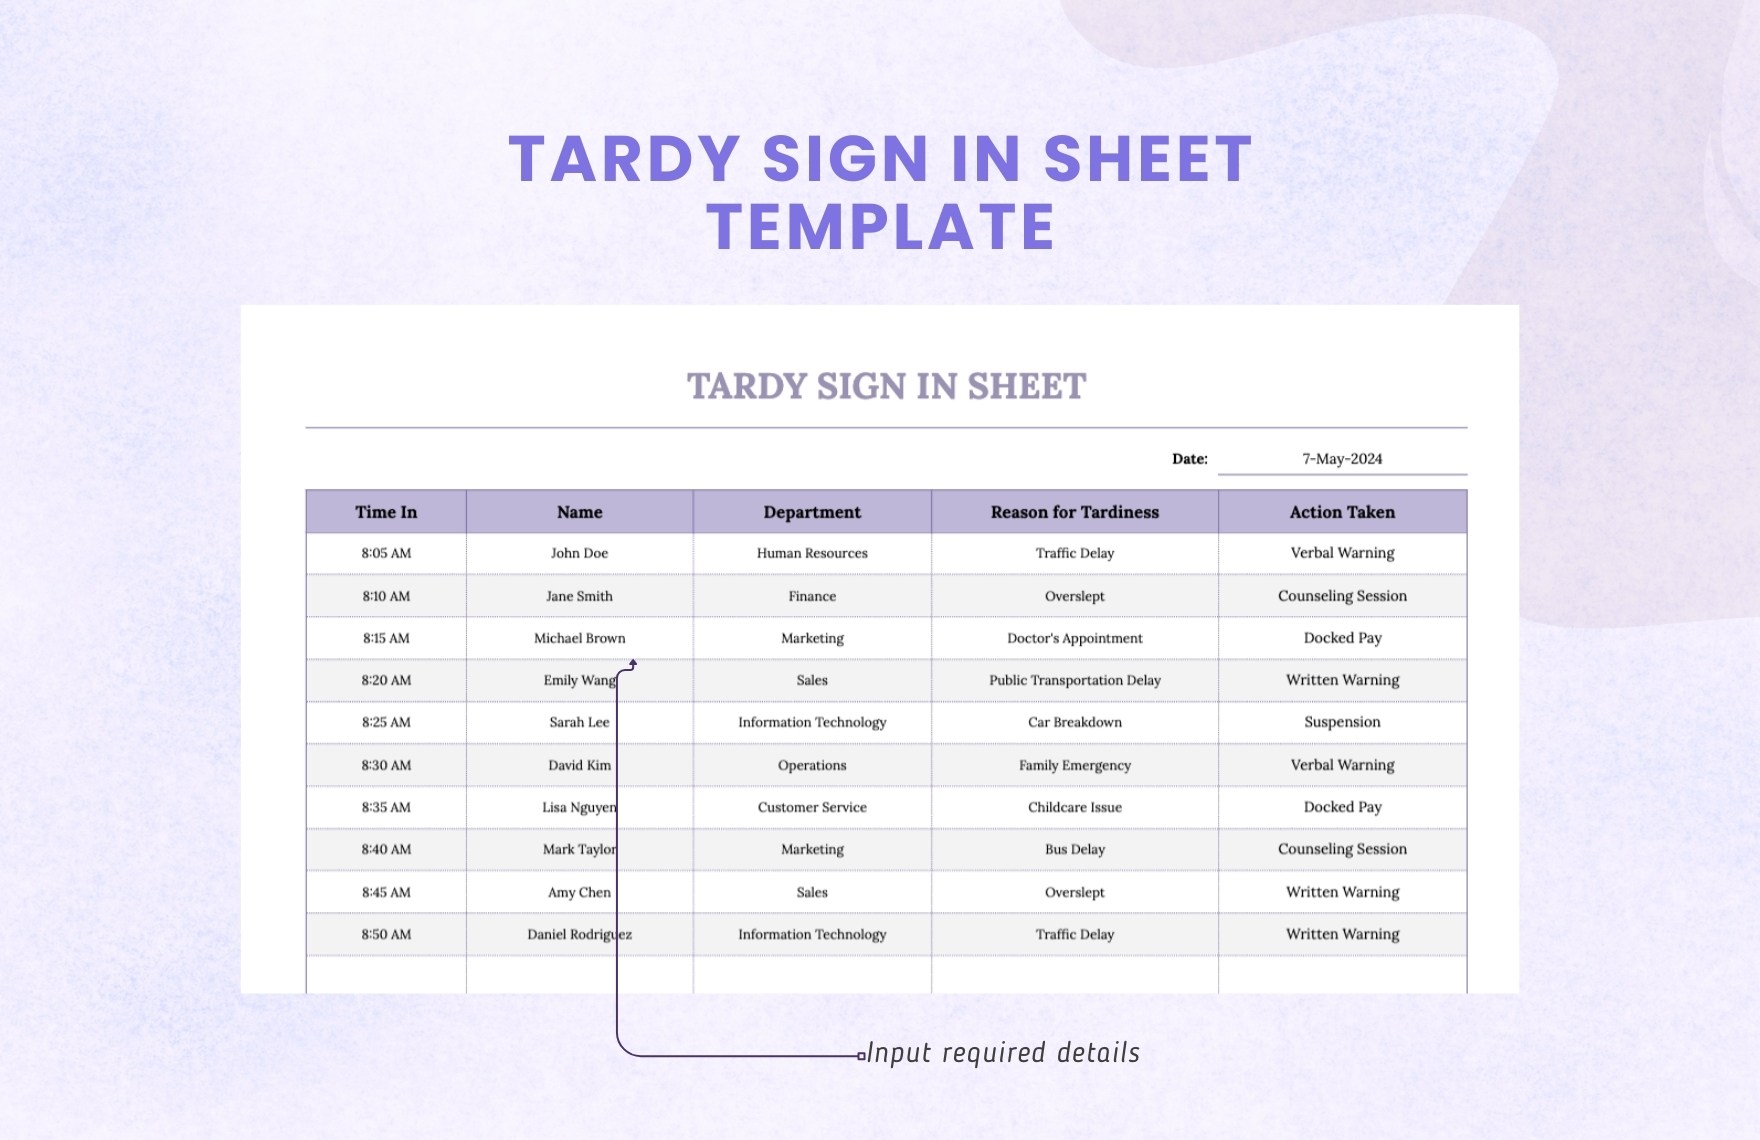 Tardy Sign in Sheet Template